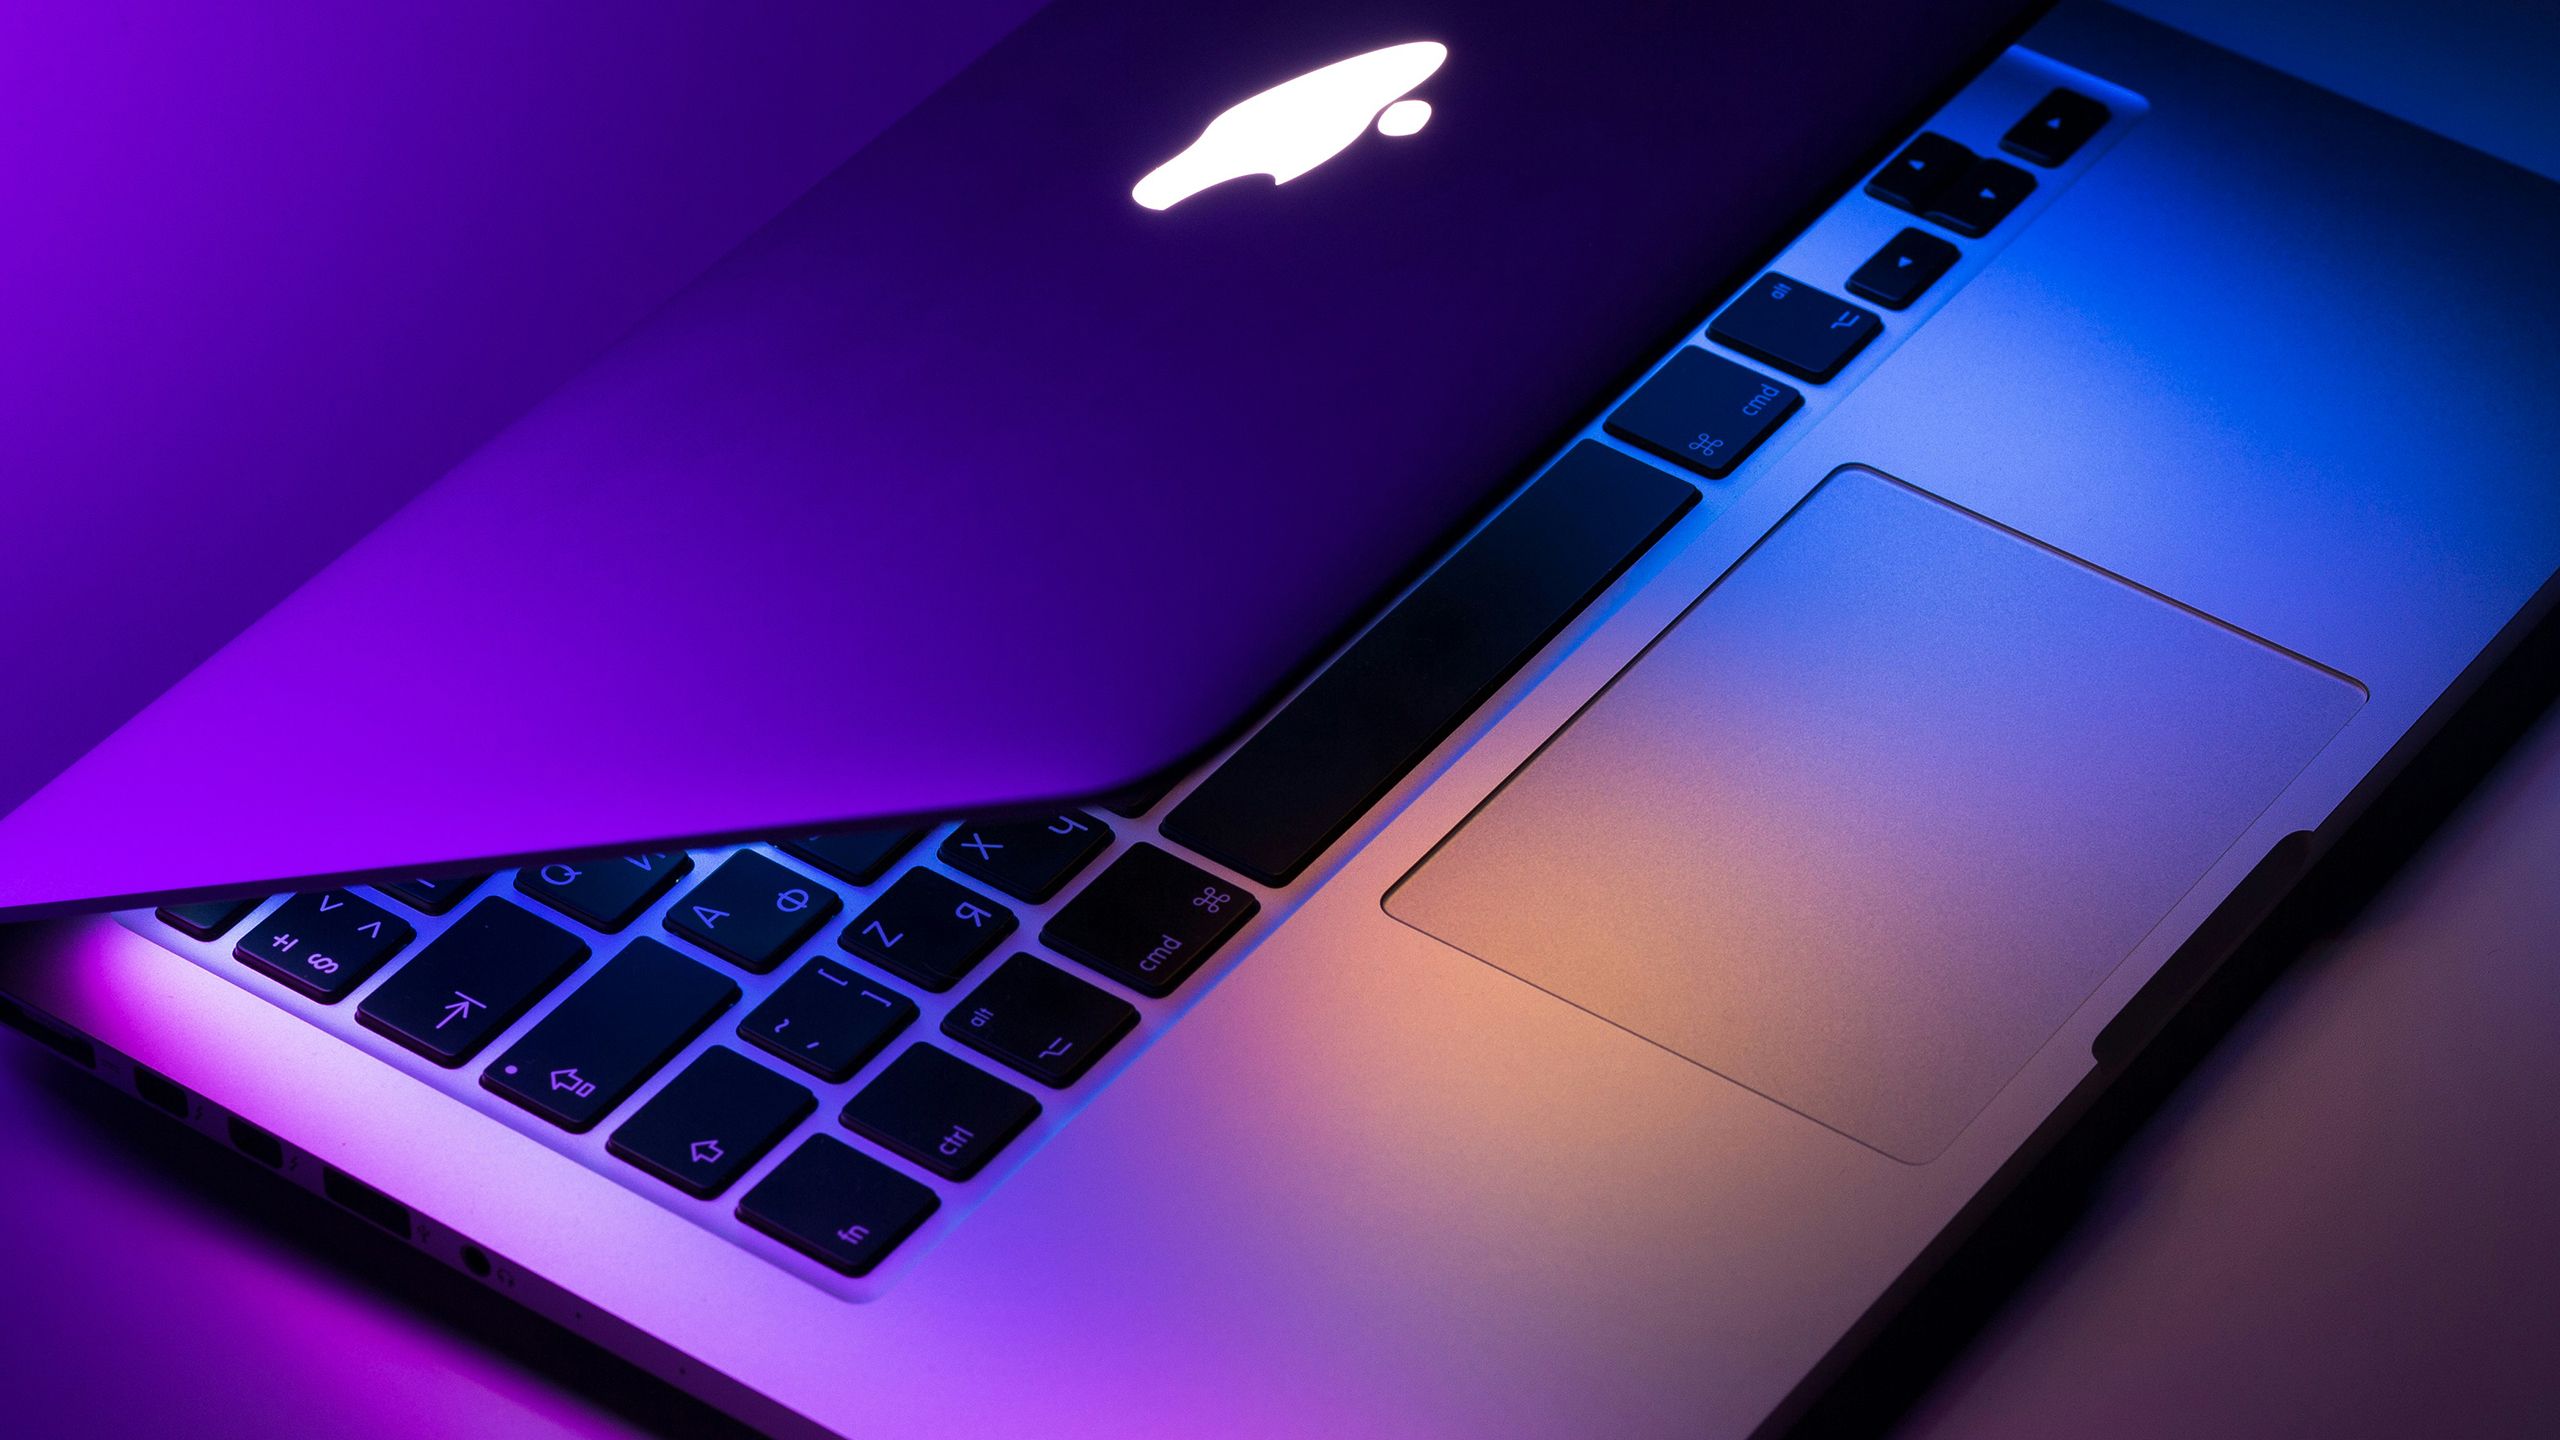 10 must-have Mac apps to install first